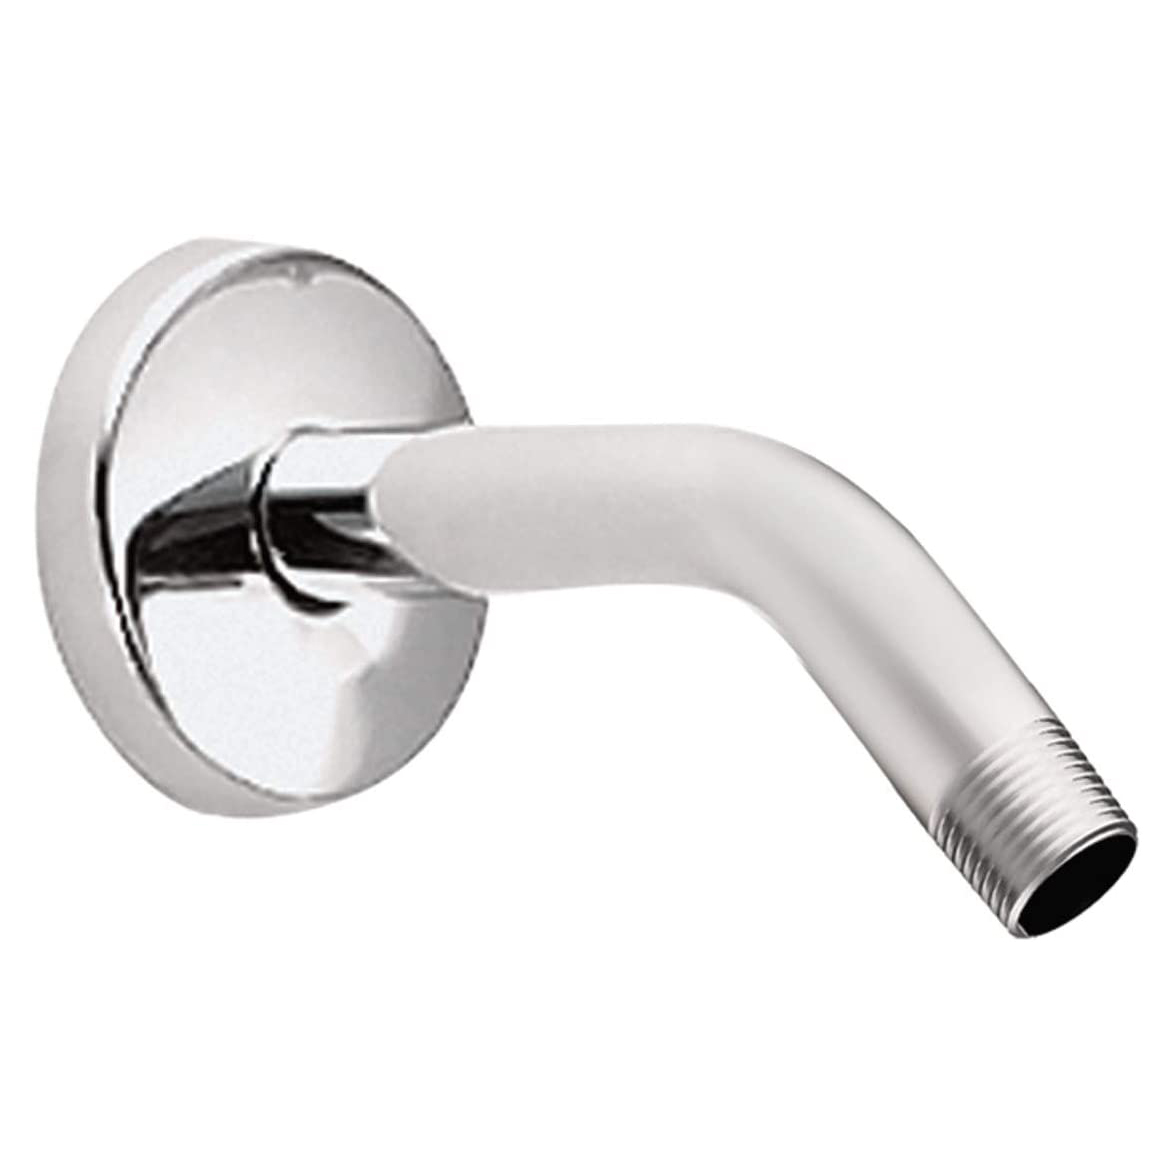 Ceiling Mount Shower Arm & Flange In Chrome